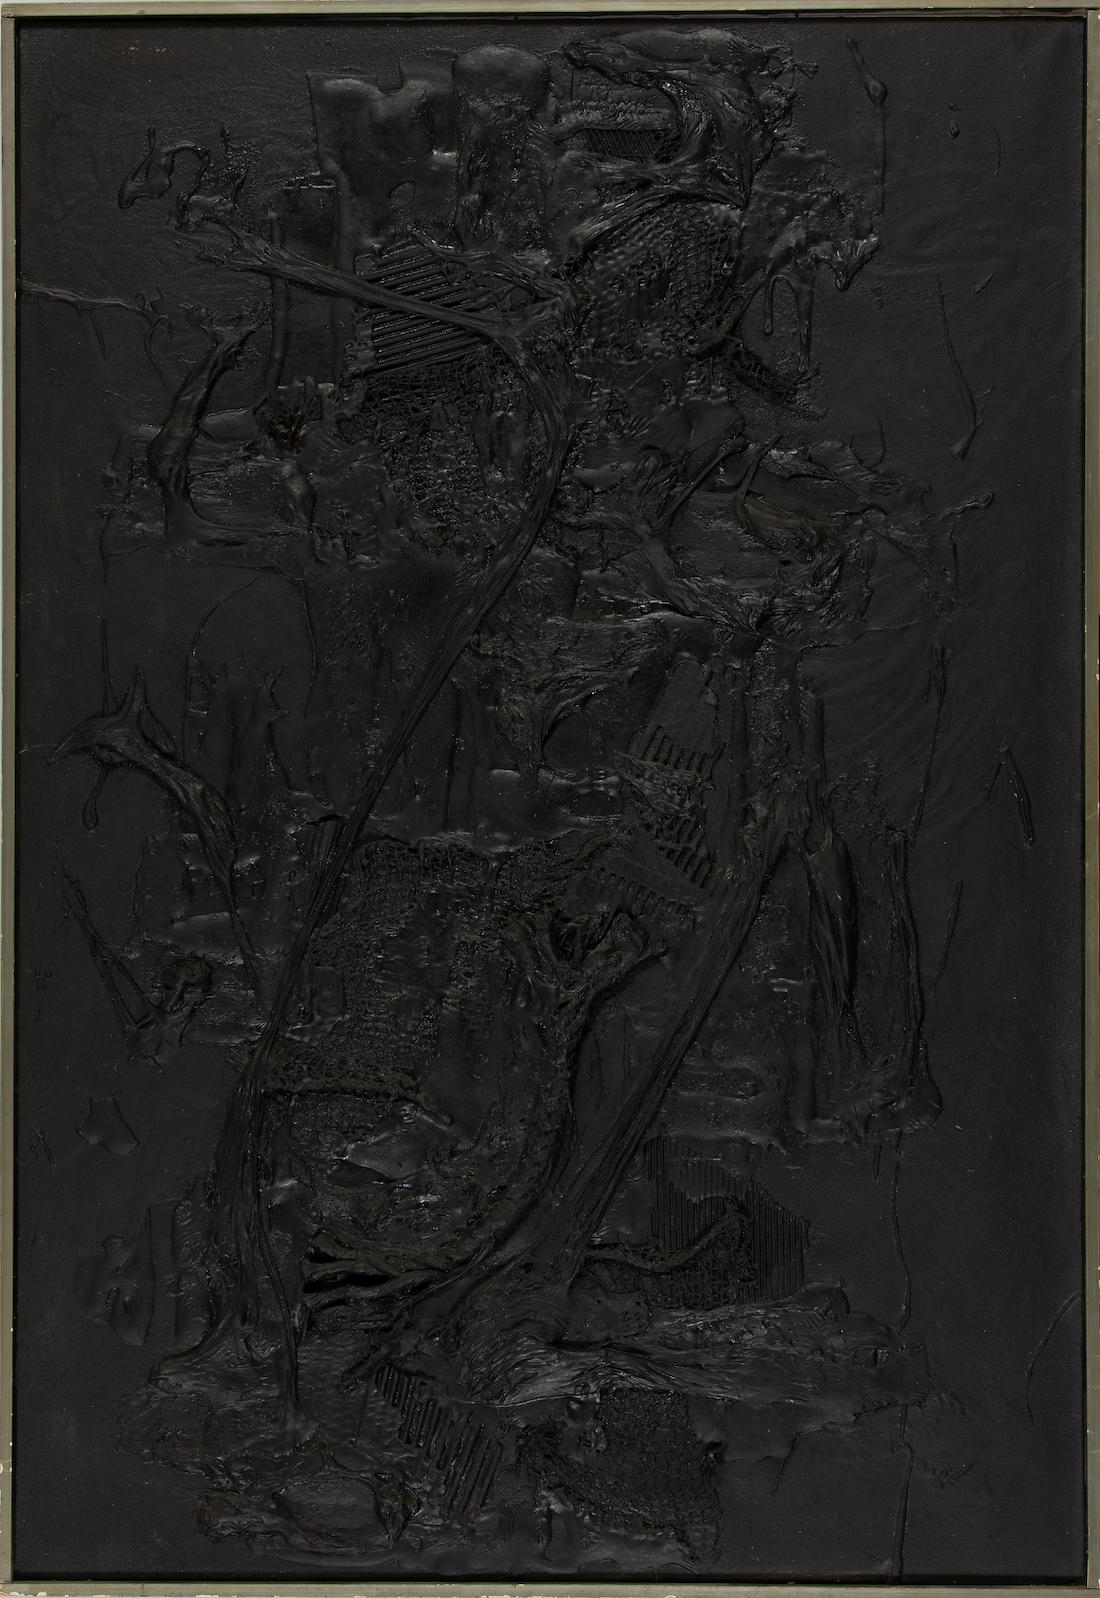 Composition by Aika Brown (1937-1964)
Mixed media on canvas
130 x 89cm (51 ¹/₈ x 35 inches)
Signed and dated on the reverse, B. AIKA Paris 1961
Executed in 1961
